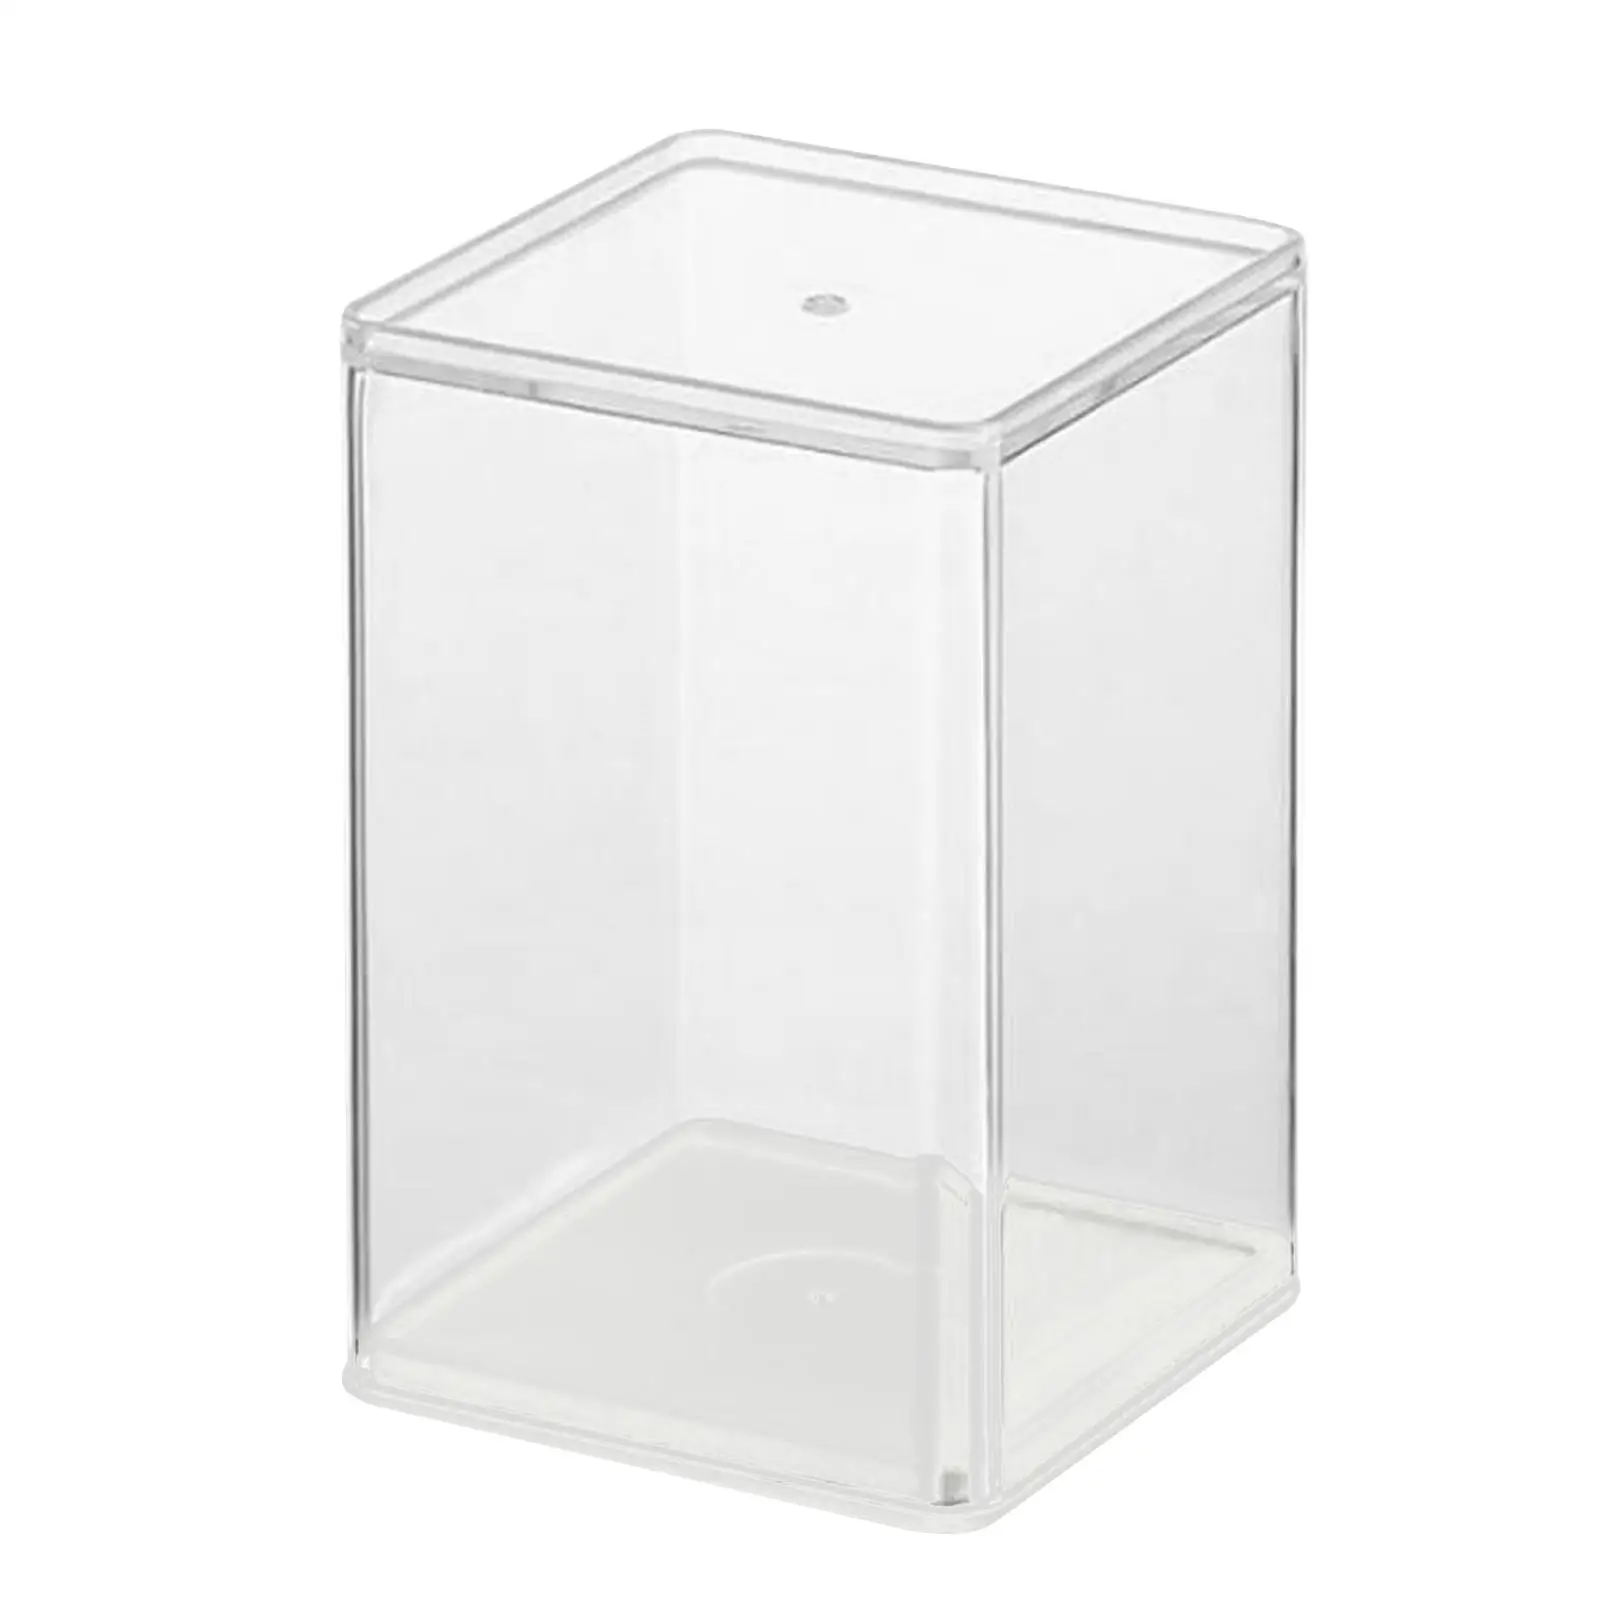 Acrylic Display Rack Organizer Assemble Countertop Box for Collectibles Kids